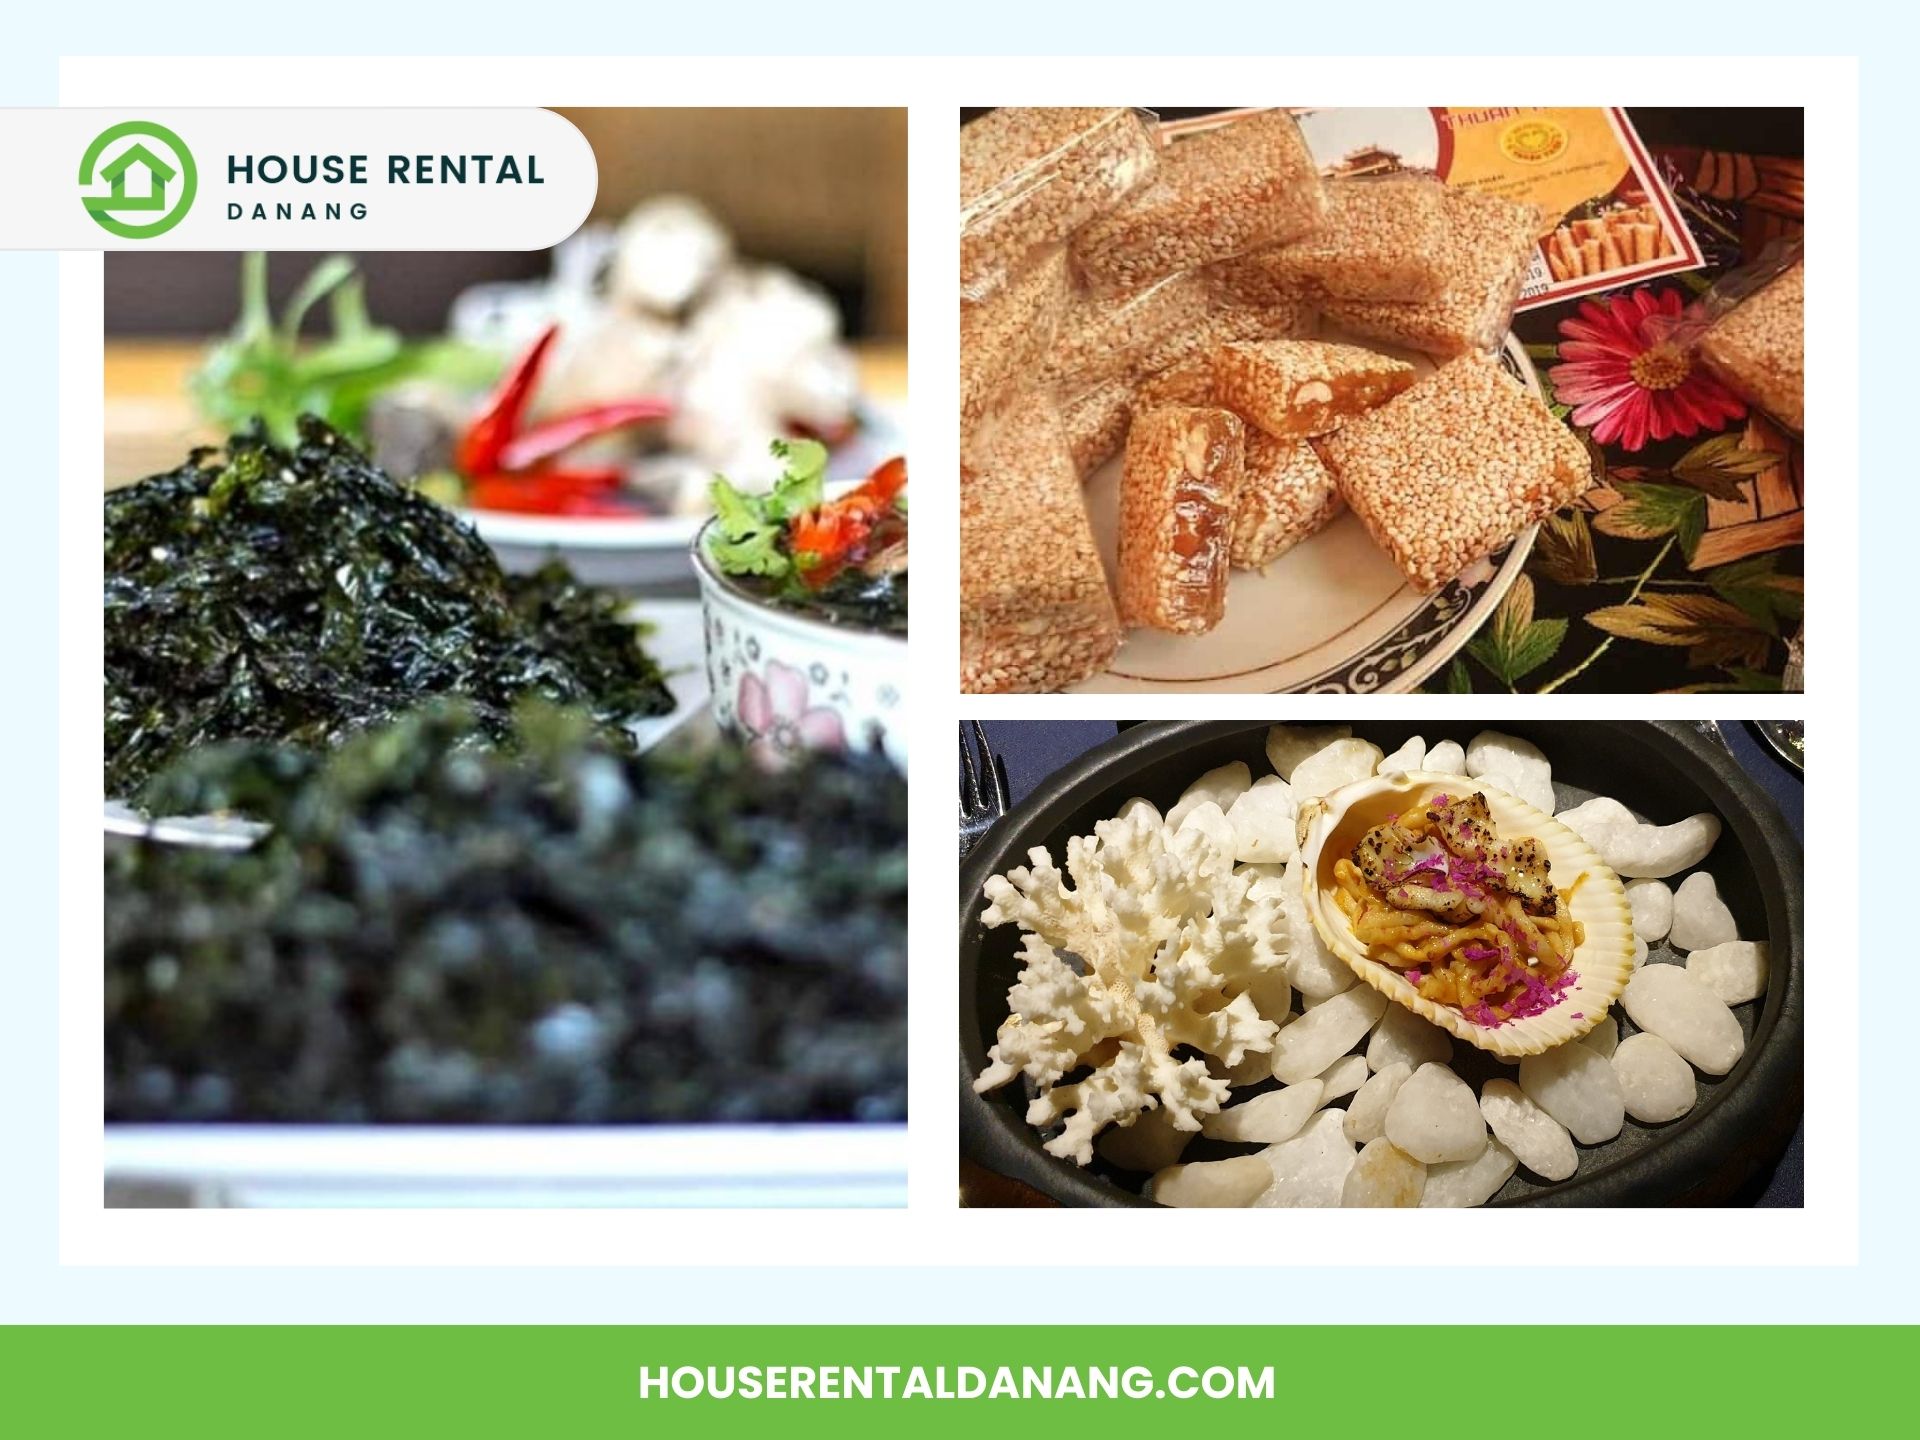 A collage image featuring seaweed, sesame bars, and a dish with white mushrooms on a black tray, highlighting culinary delights and used in a promotional context for House Rental Danang. Discover these delicacies at the best places for shopping in Da Nang!